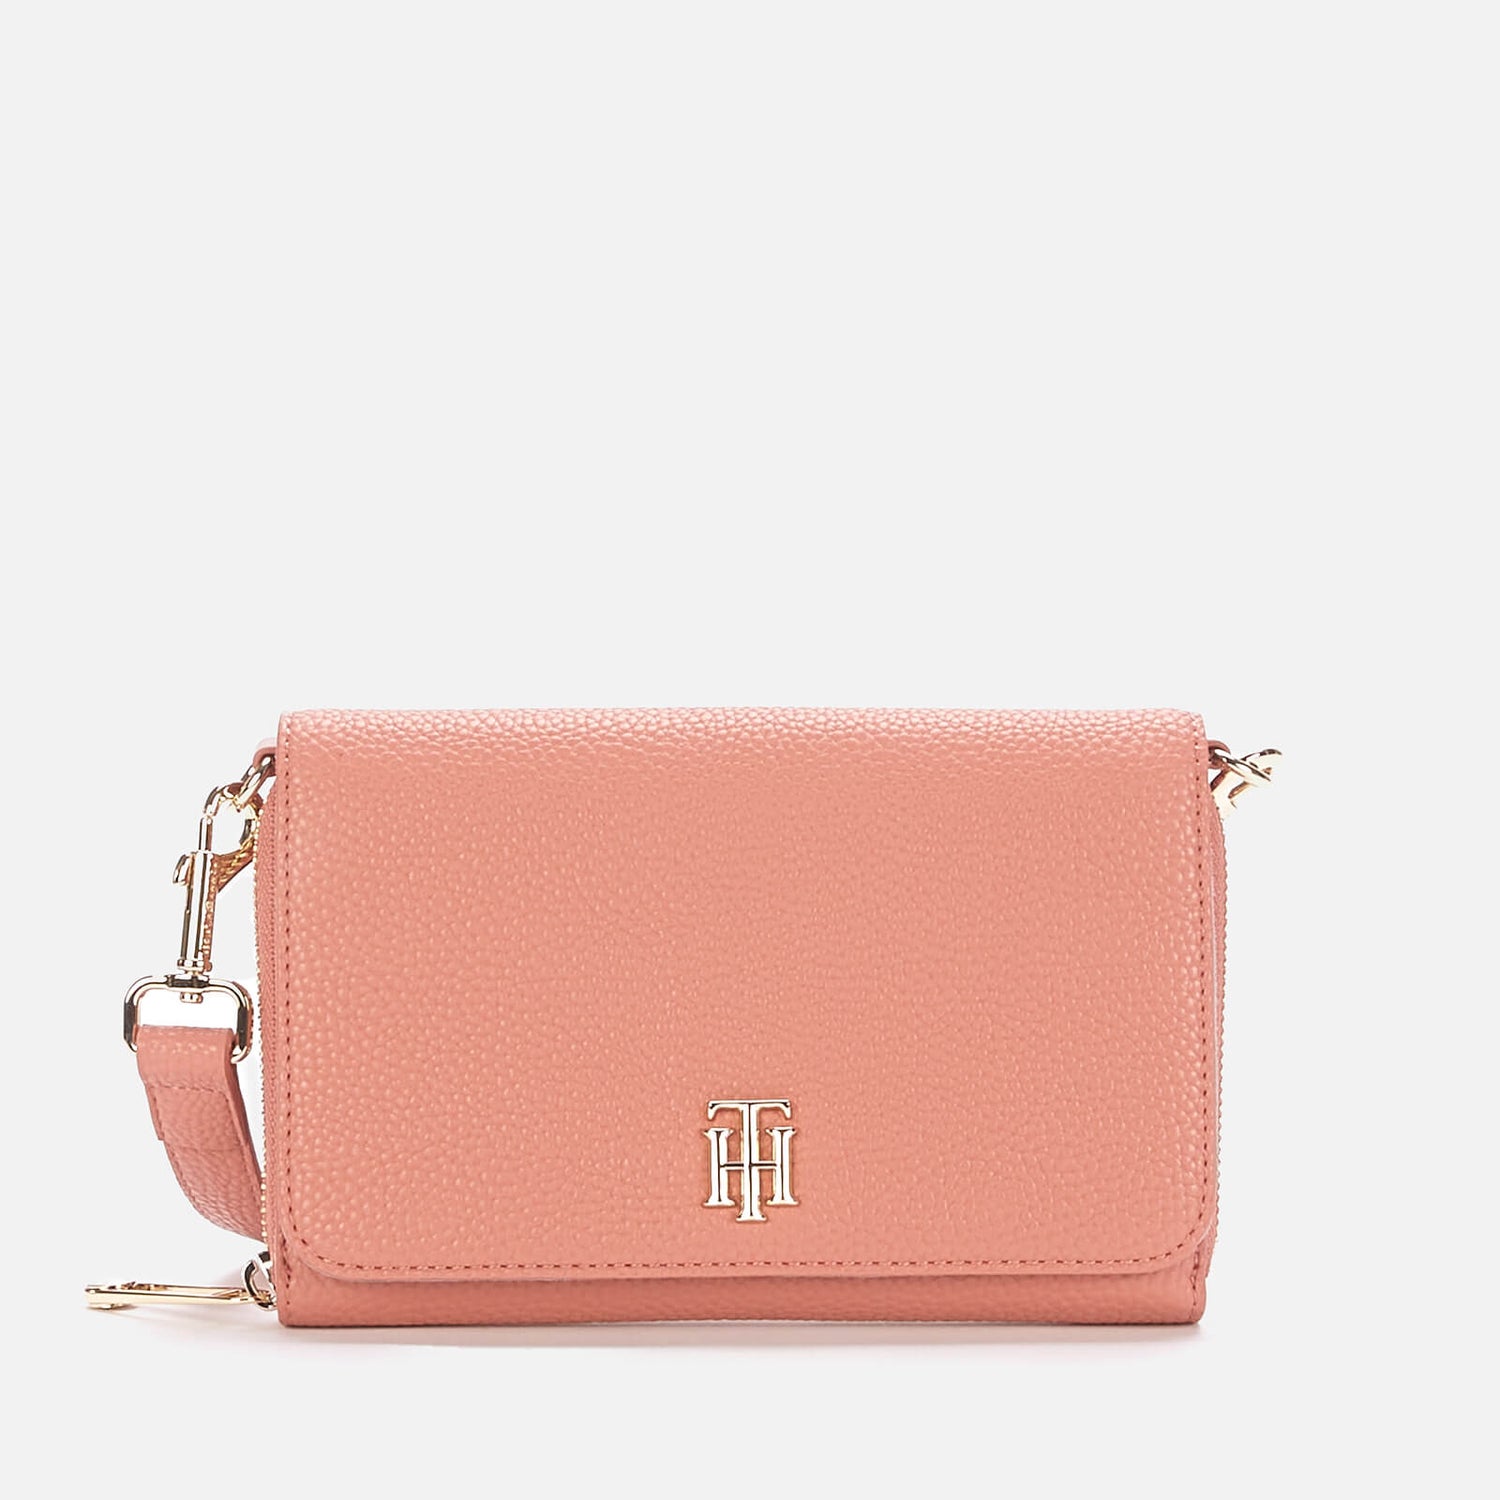 Tommy Hilfiger Women's TH Soft Small Crossover Bag - Mineralize